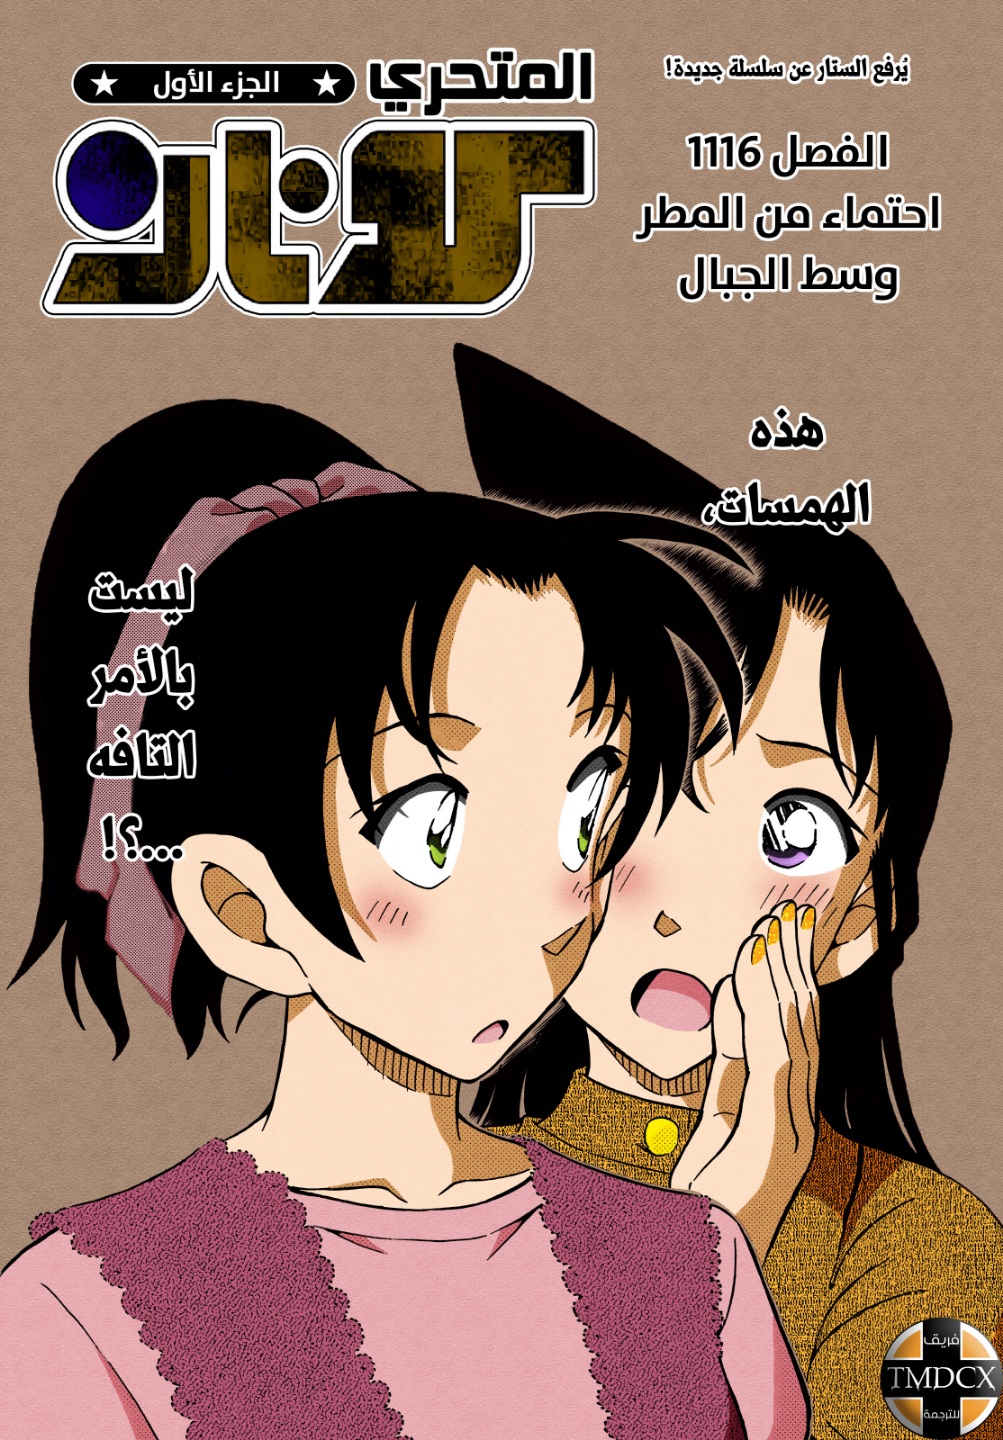 Detective Conan: Chapter 1116 - Page 1